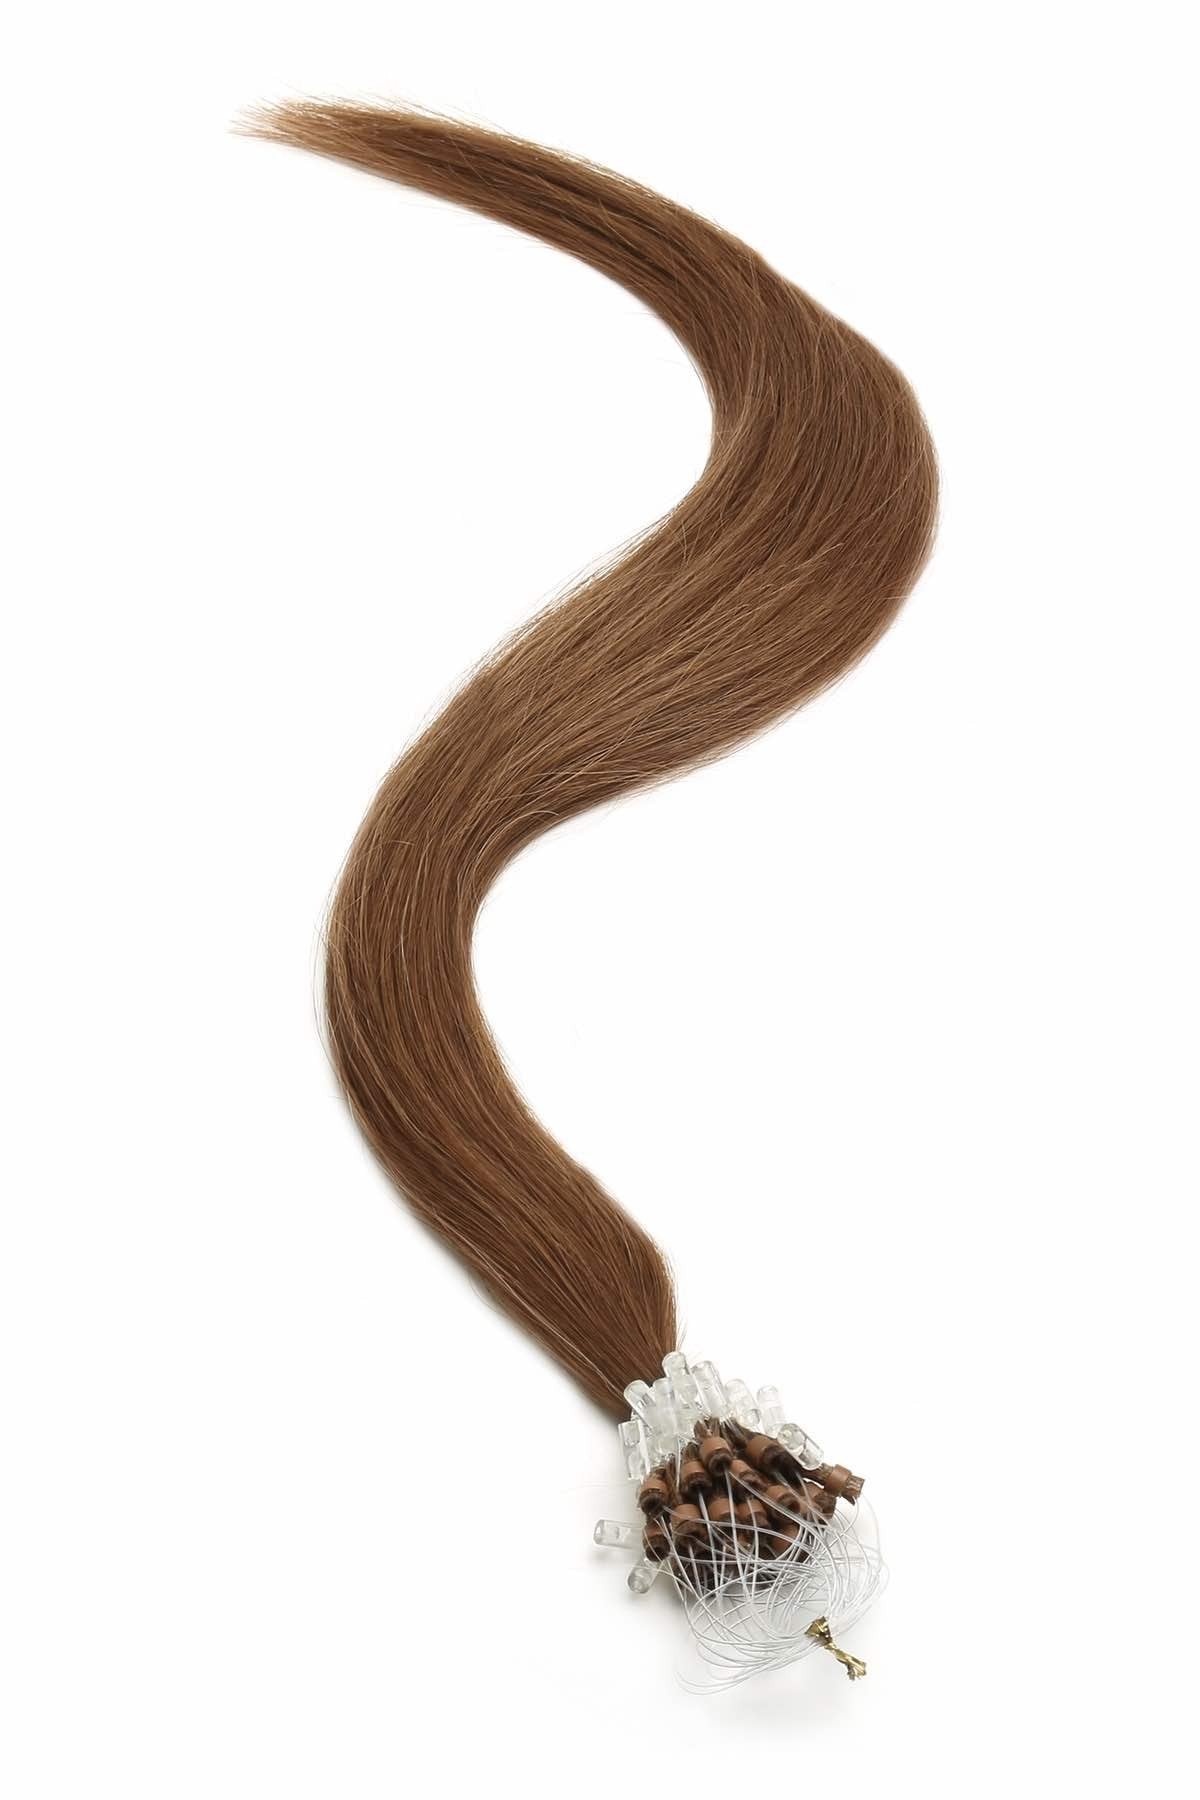 Micro Ring Hair Extensions | 18 inch Warm Brown (4LB) - Beauty Hair Products LtdHair Extensions